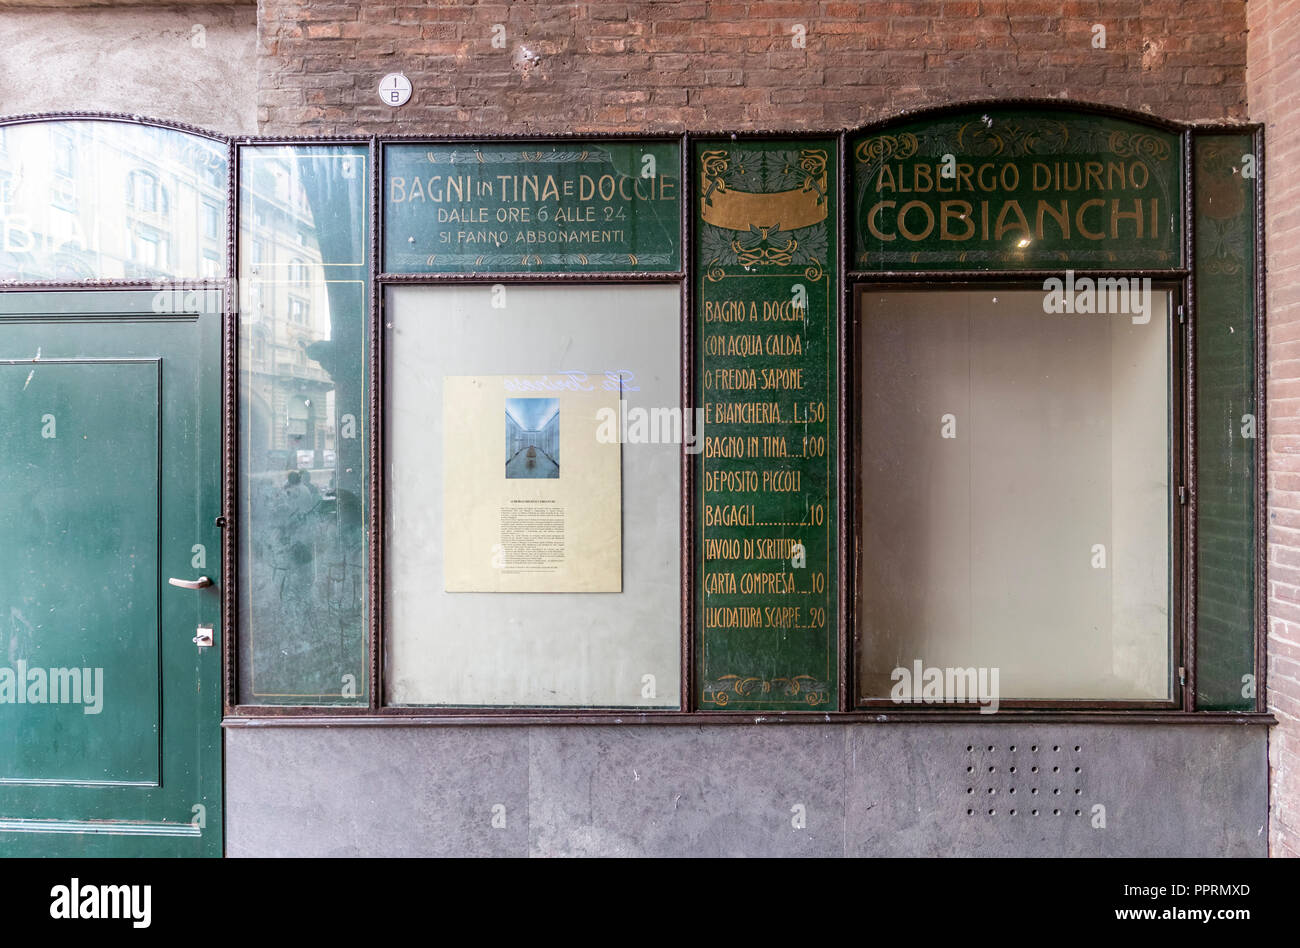 One of the few remaining Cobianchi Day Hotels left in Italy. These hotels were, at the time, the epitome of style and design. Bologna, Italy. Stock Photo